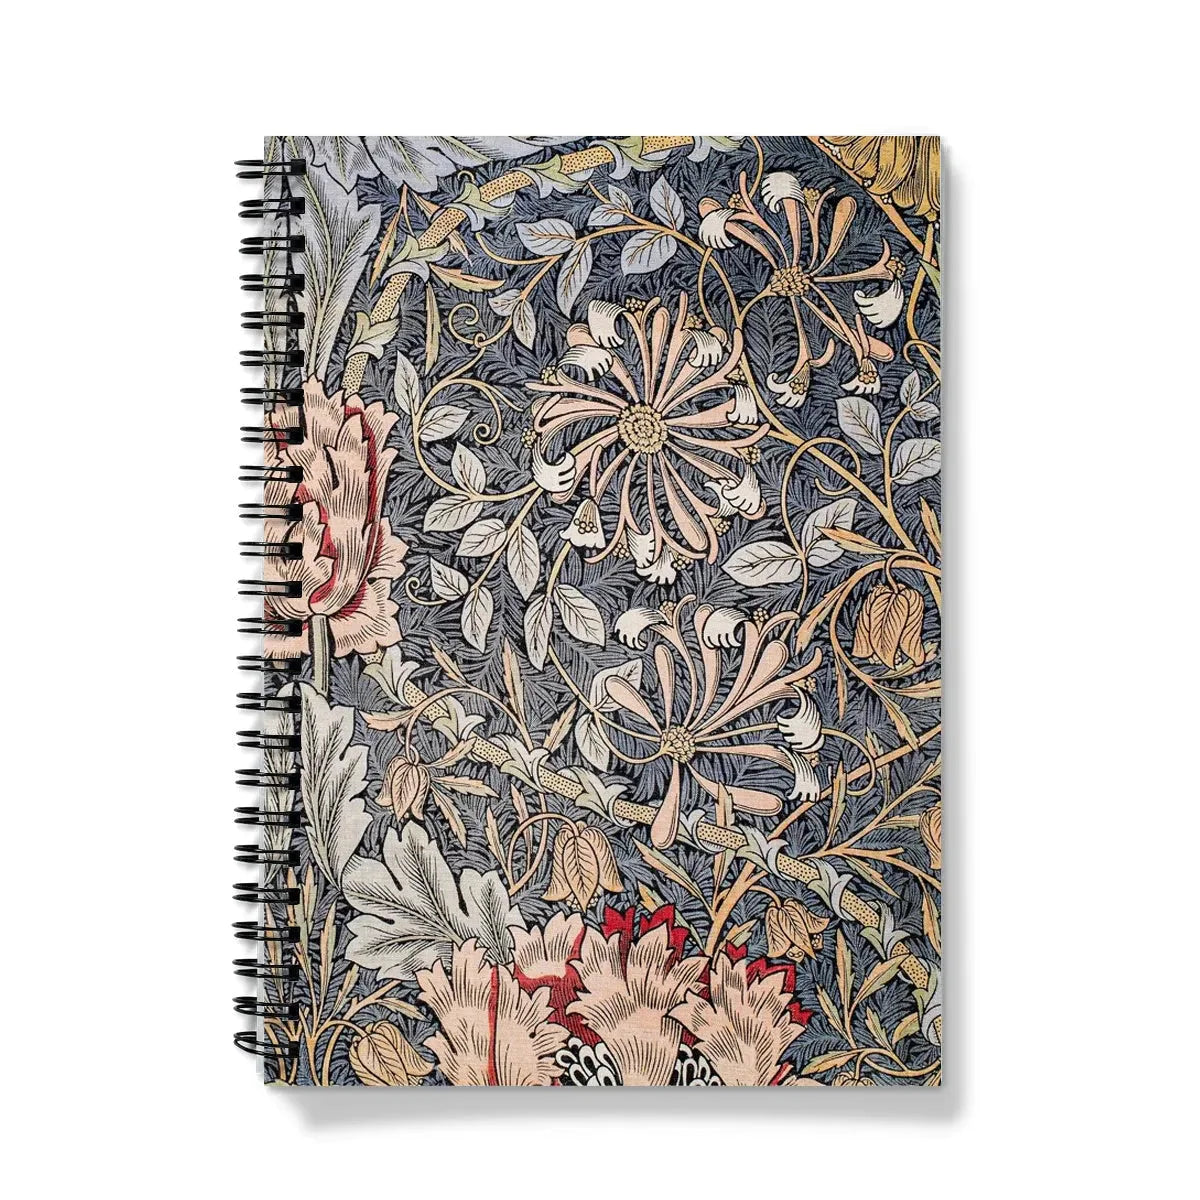 Honeysuckle By William Morris Notebook - A5 - Graph Paper - Notebooks & Notepads - Aesthetic Art